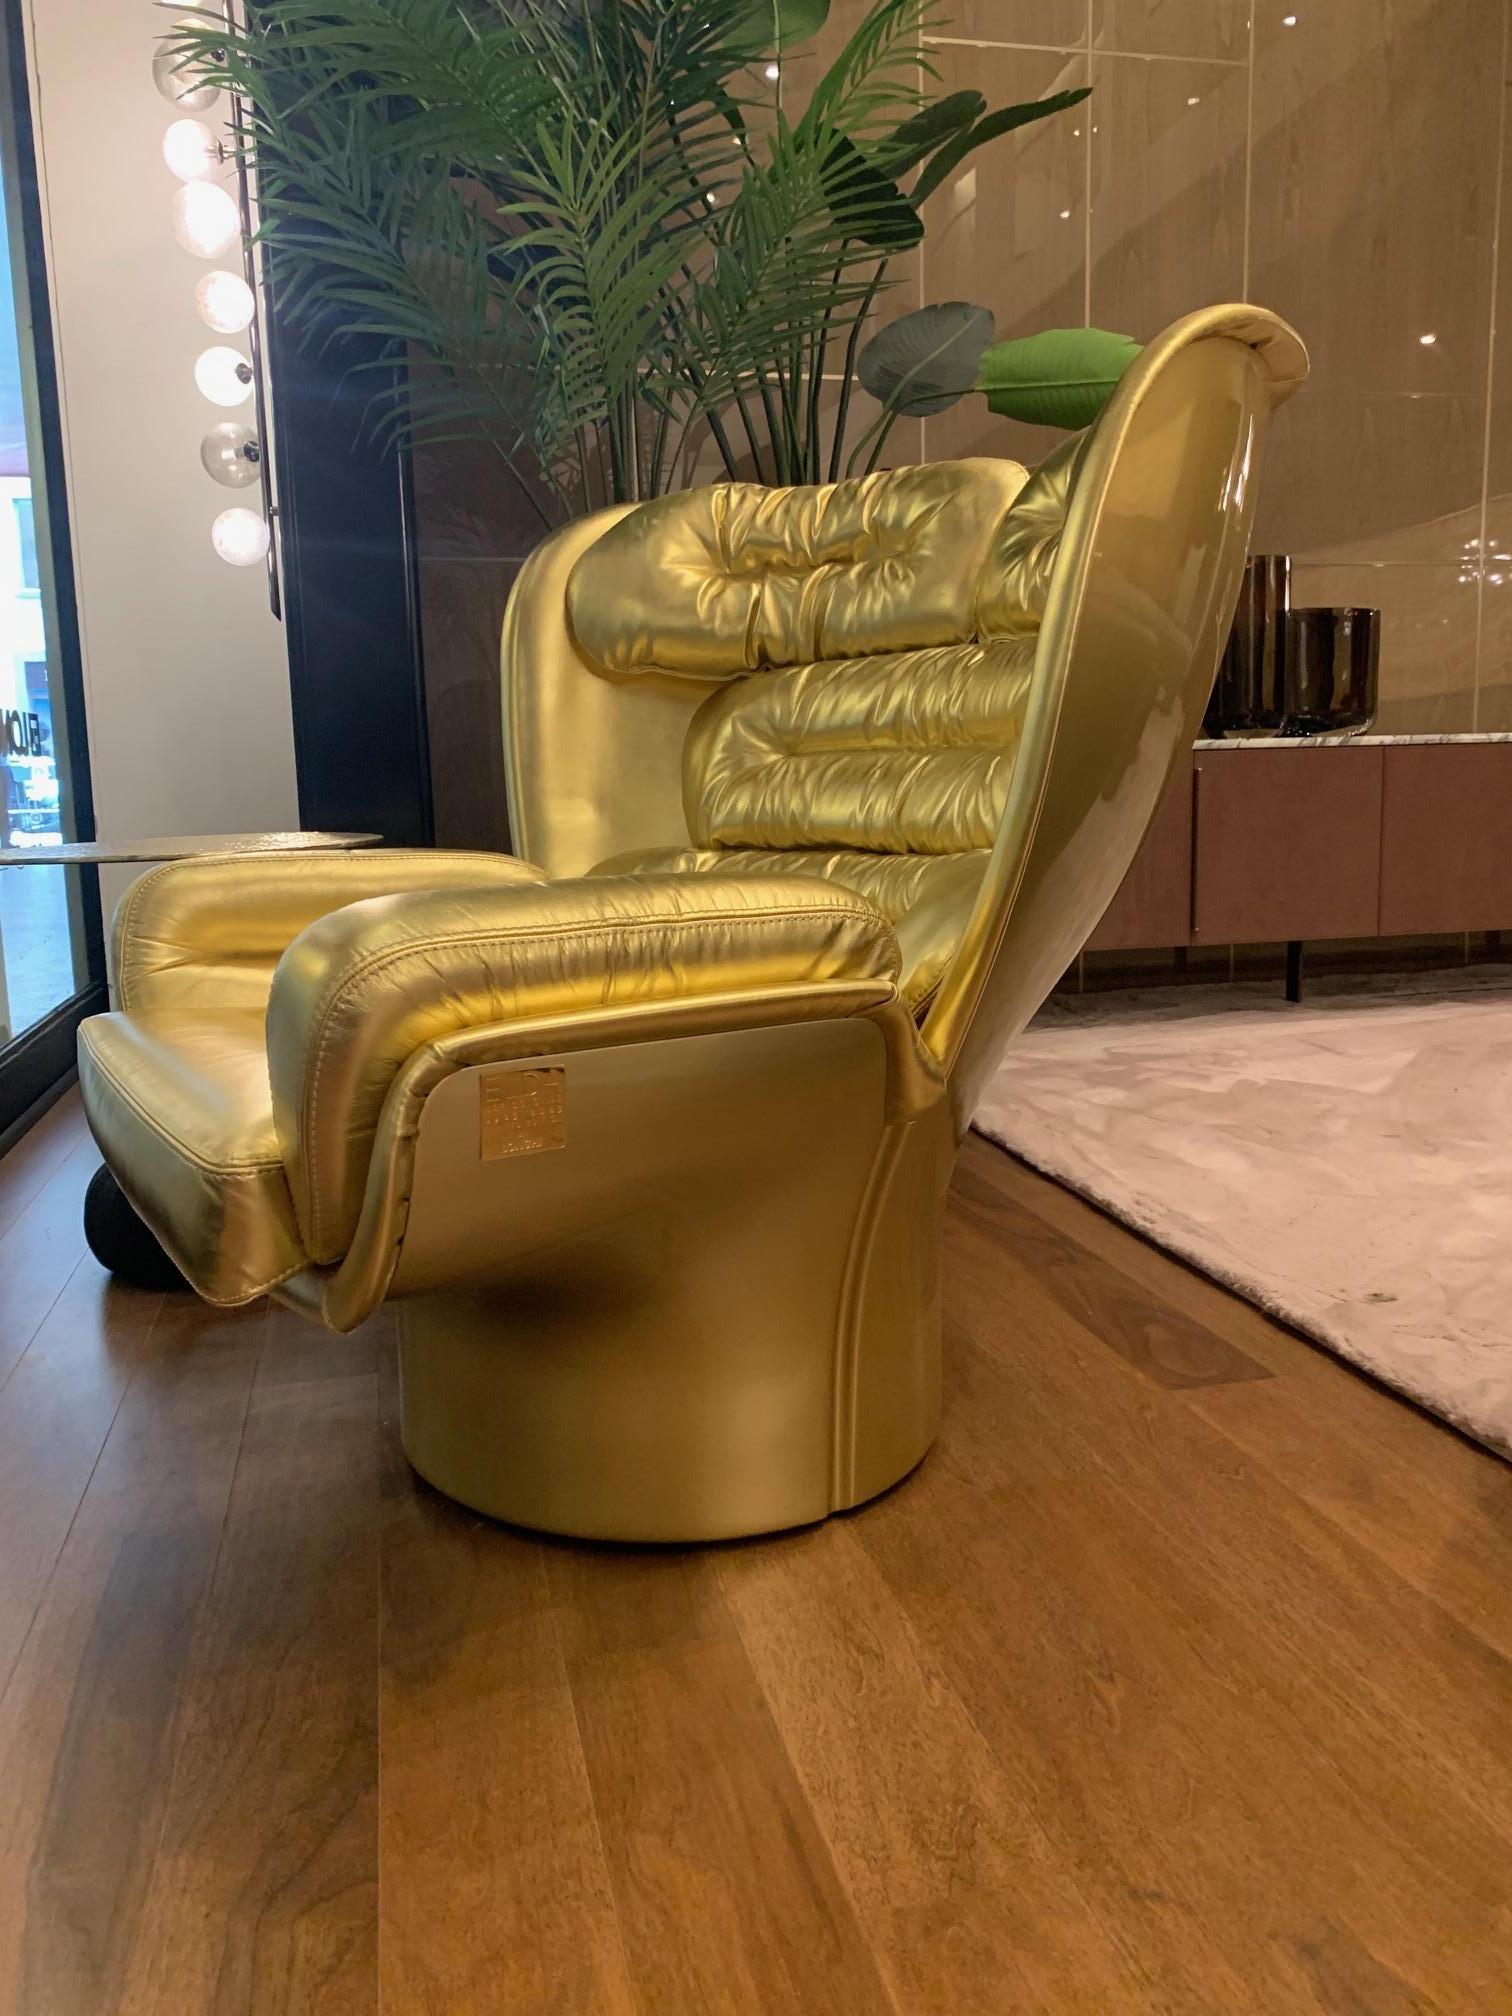 Showroom model in impeccable new condition!
Iconic Space Age classic: Elda Chair by Joe Colombo (1963- Italy).
360 degree rotatable base (swivel).

Gold leather of the highest quality (Luxury category)!
Glossy Golden Fiberglass shell.

With